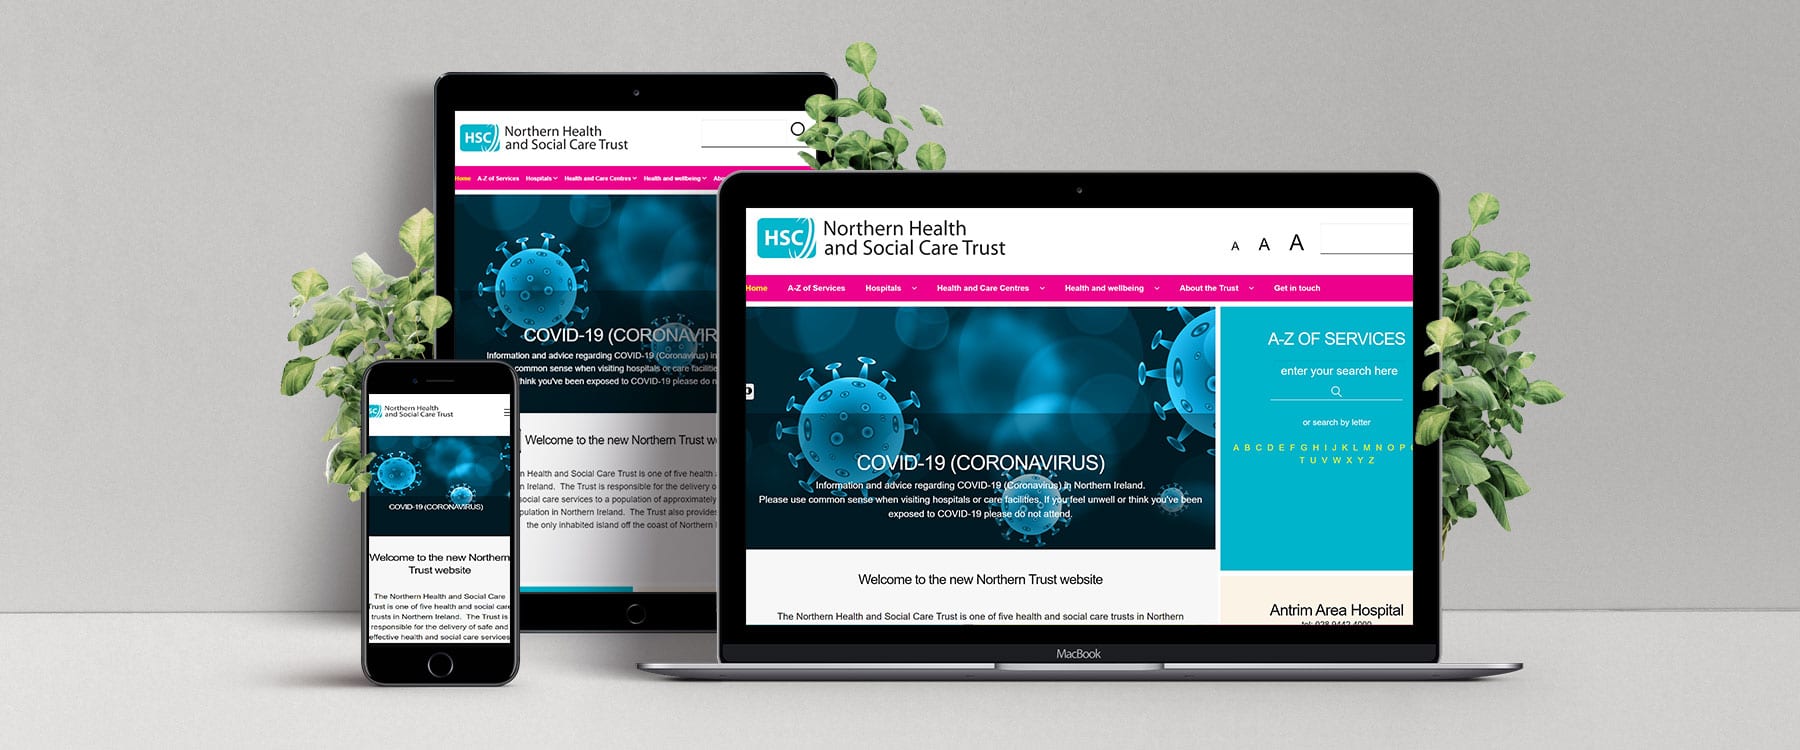 Engaging, Informative New Website for Northern Health and Social Care Trust Image